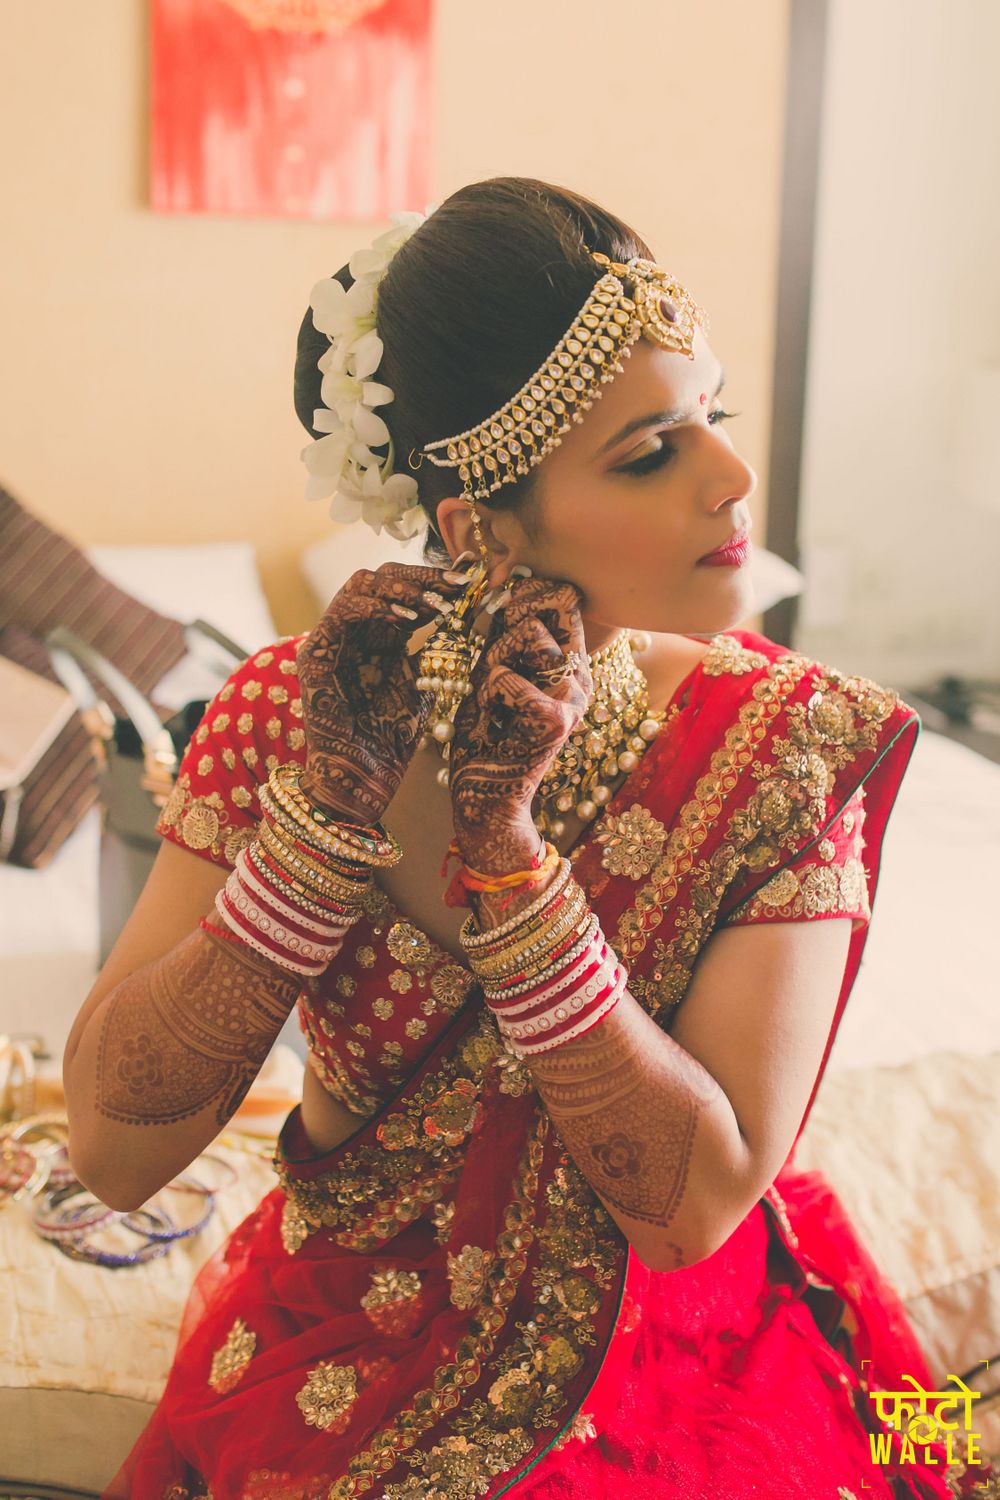 Photo of Bride in Mathapatti wearing Earrings Shot